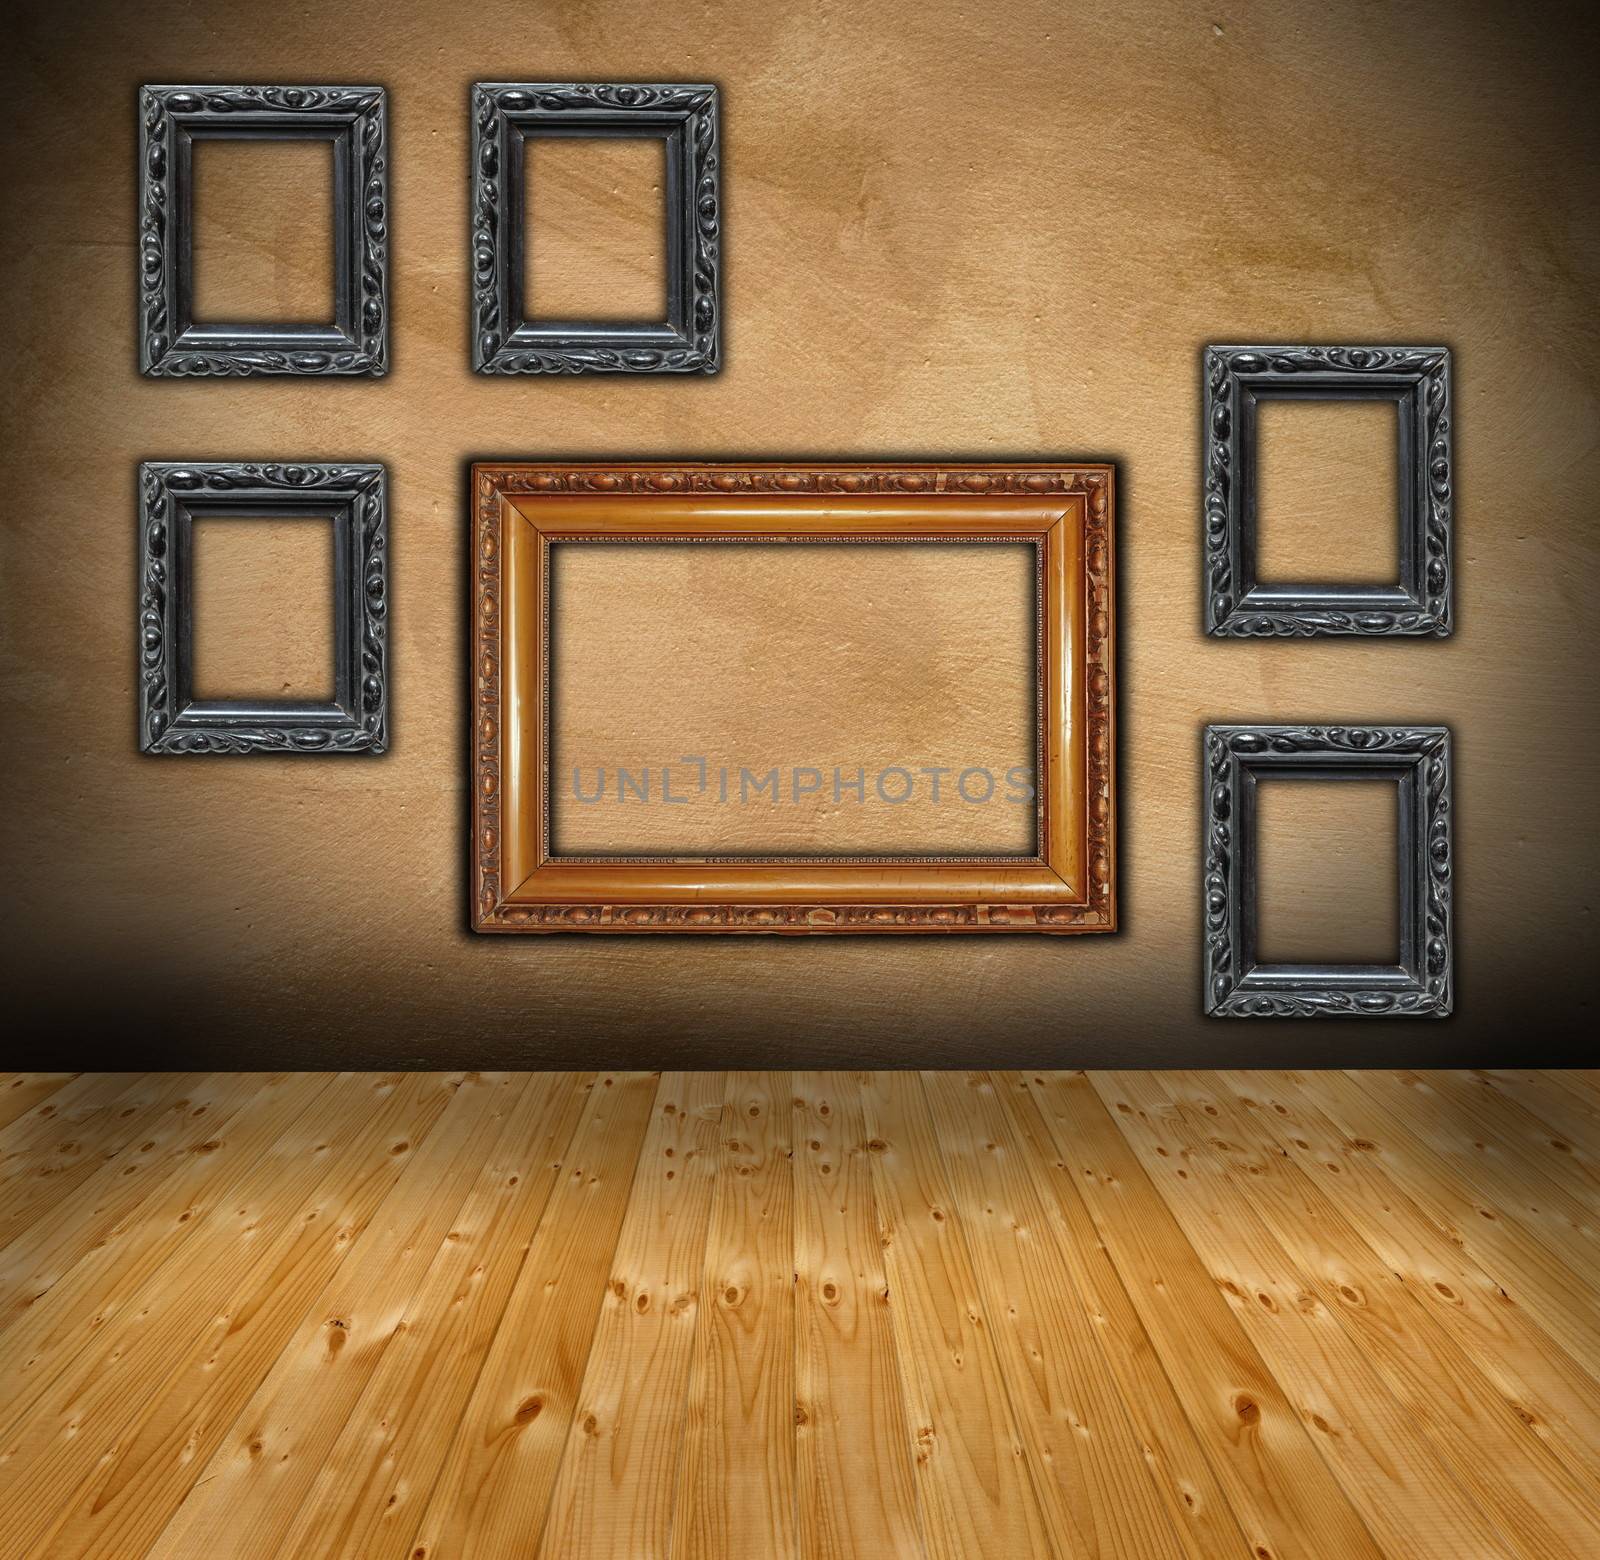 interior with wooden floor and wall with frames in an abstract composition ready for your design